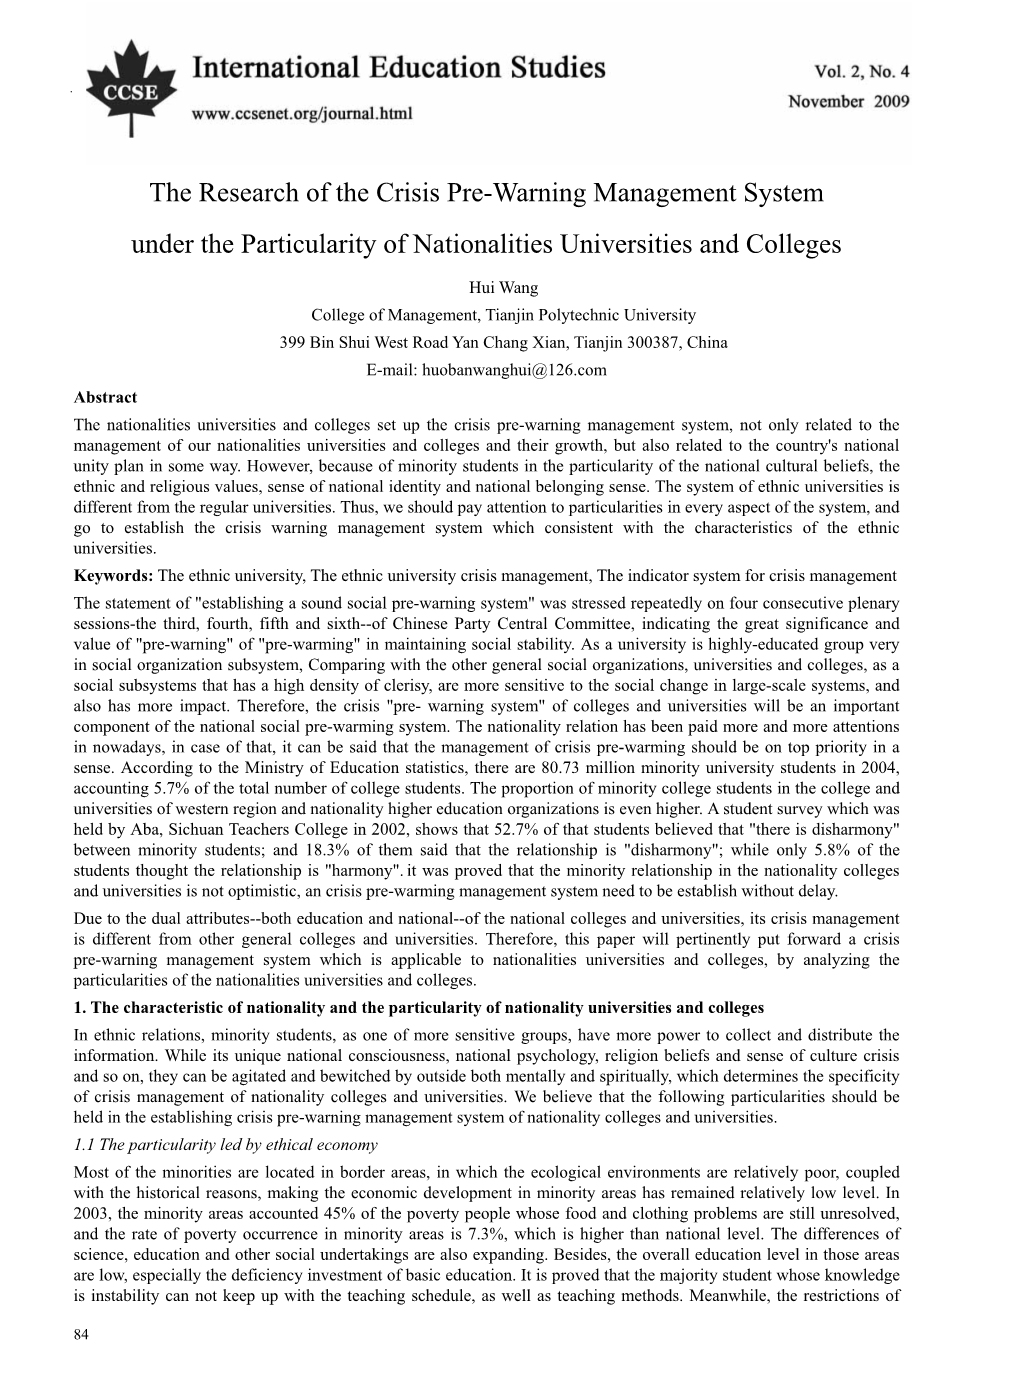 The Research of the Crisis Pre-Warning Management System Under the Particularity of Nationalities Universities and Colleges